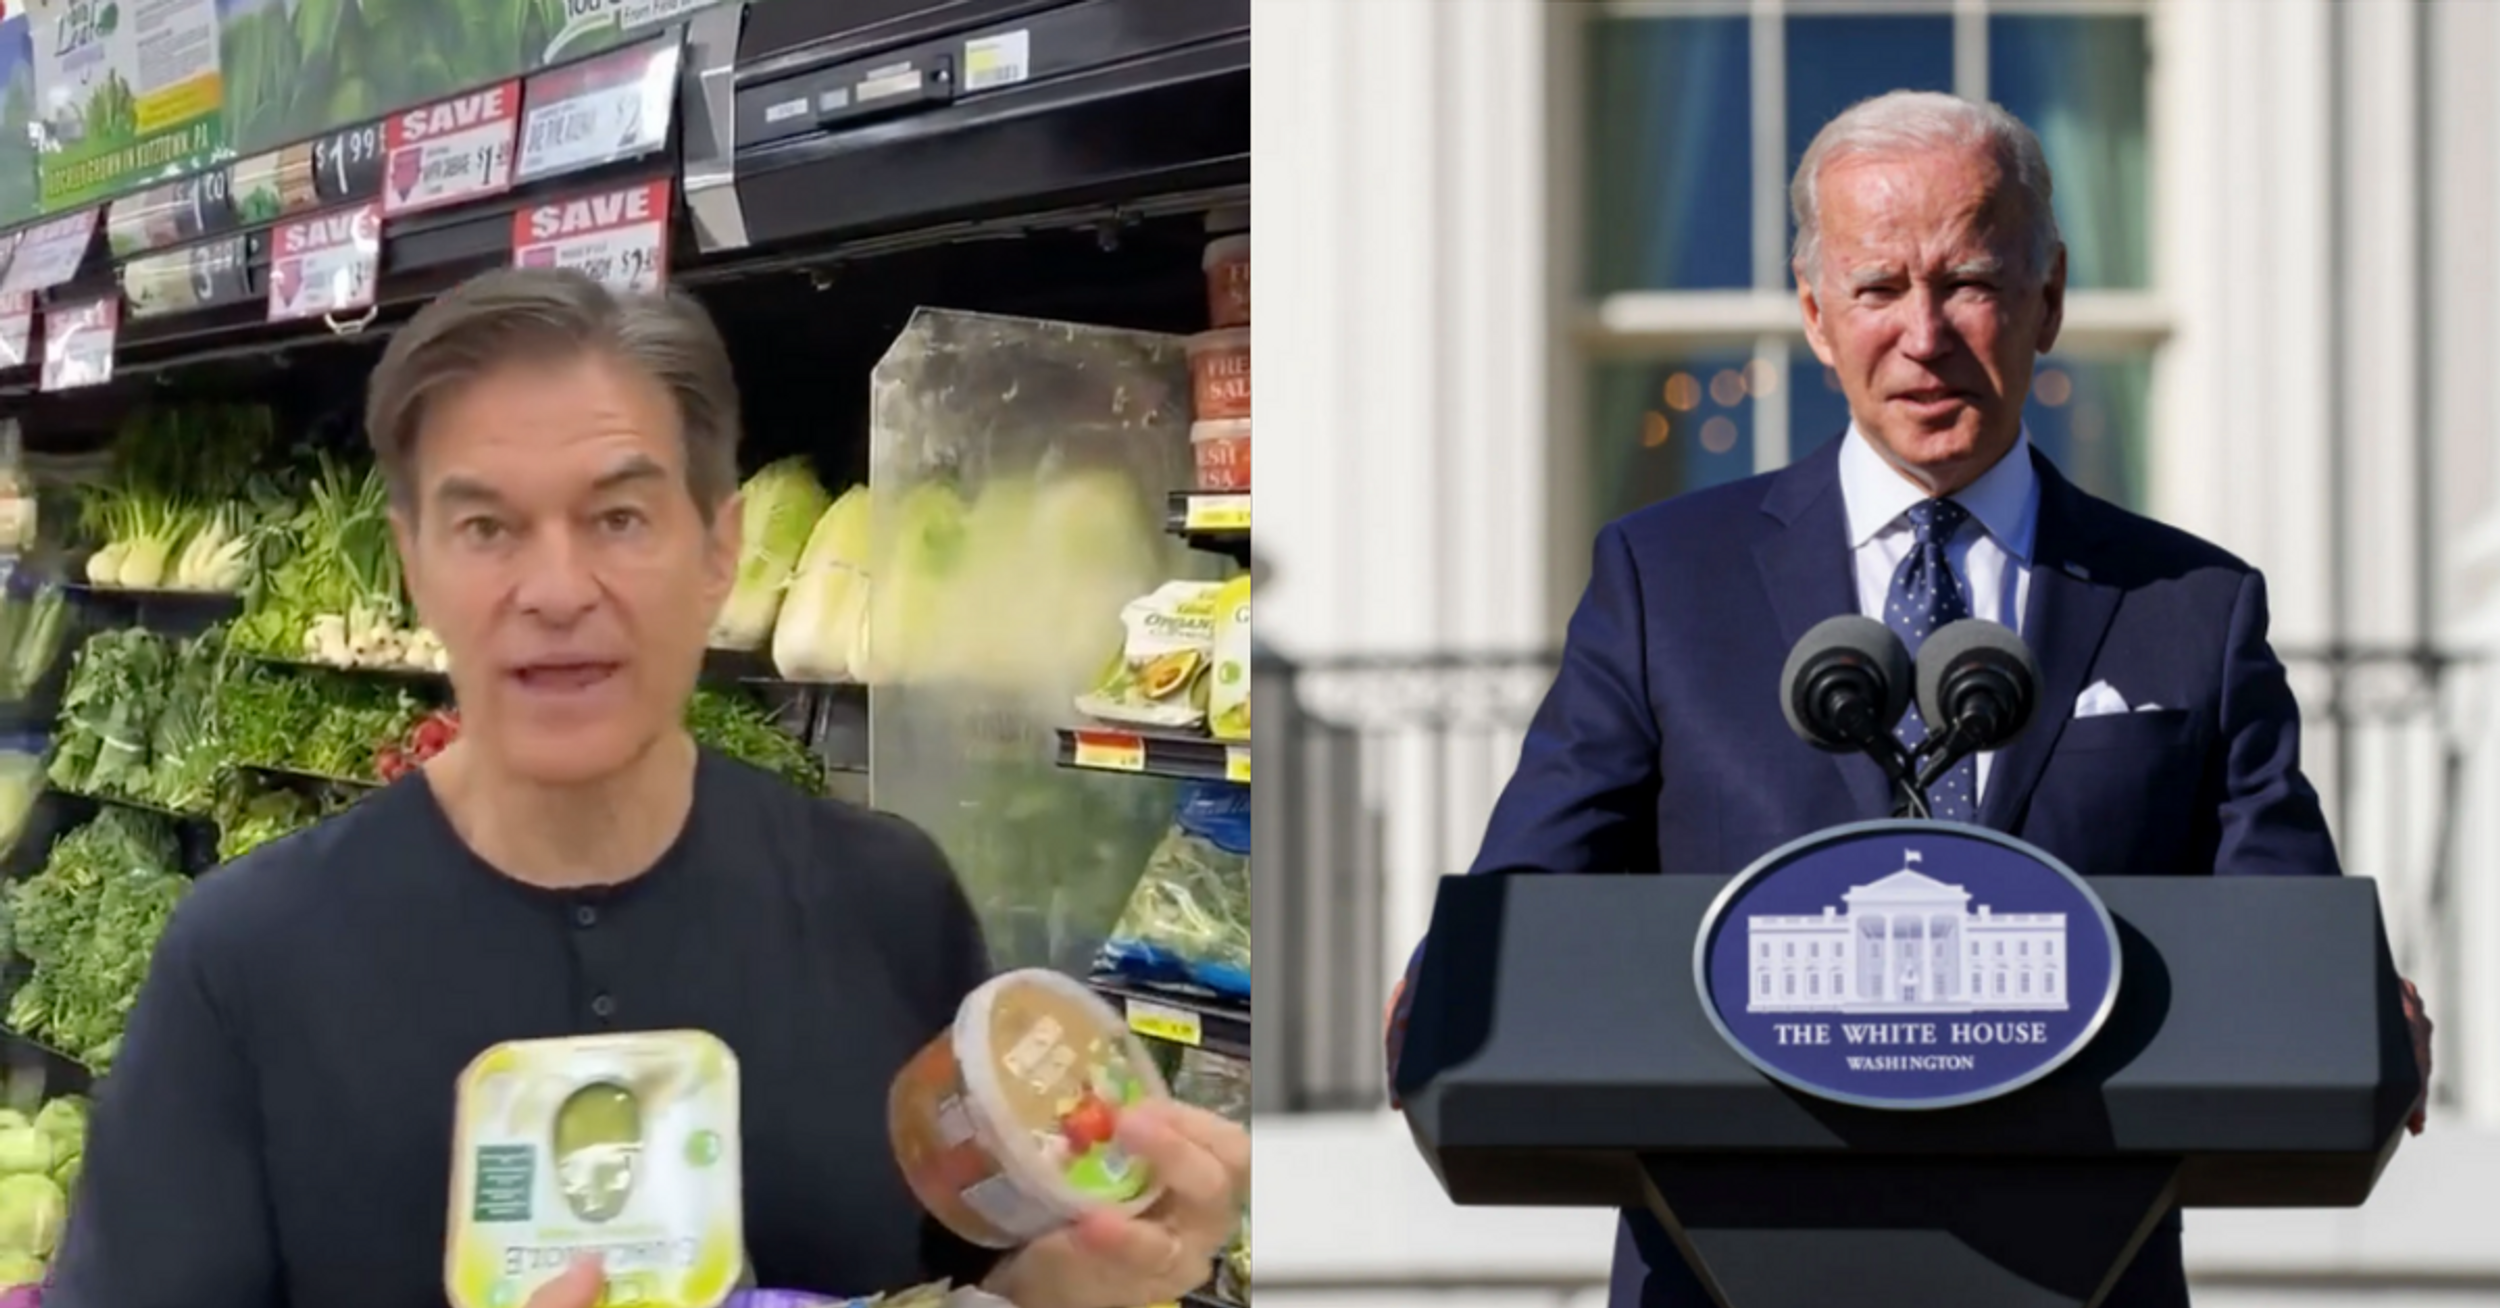 Millionaire Dr. Oz Dragged After Blaming Biden For $6 Salsa In Bizarre Grocery Shopping Video